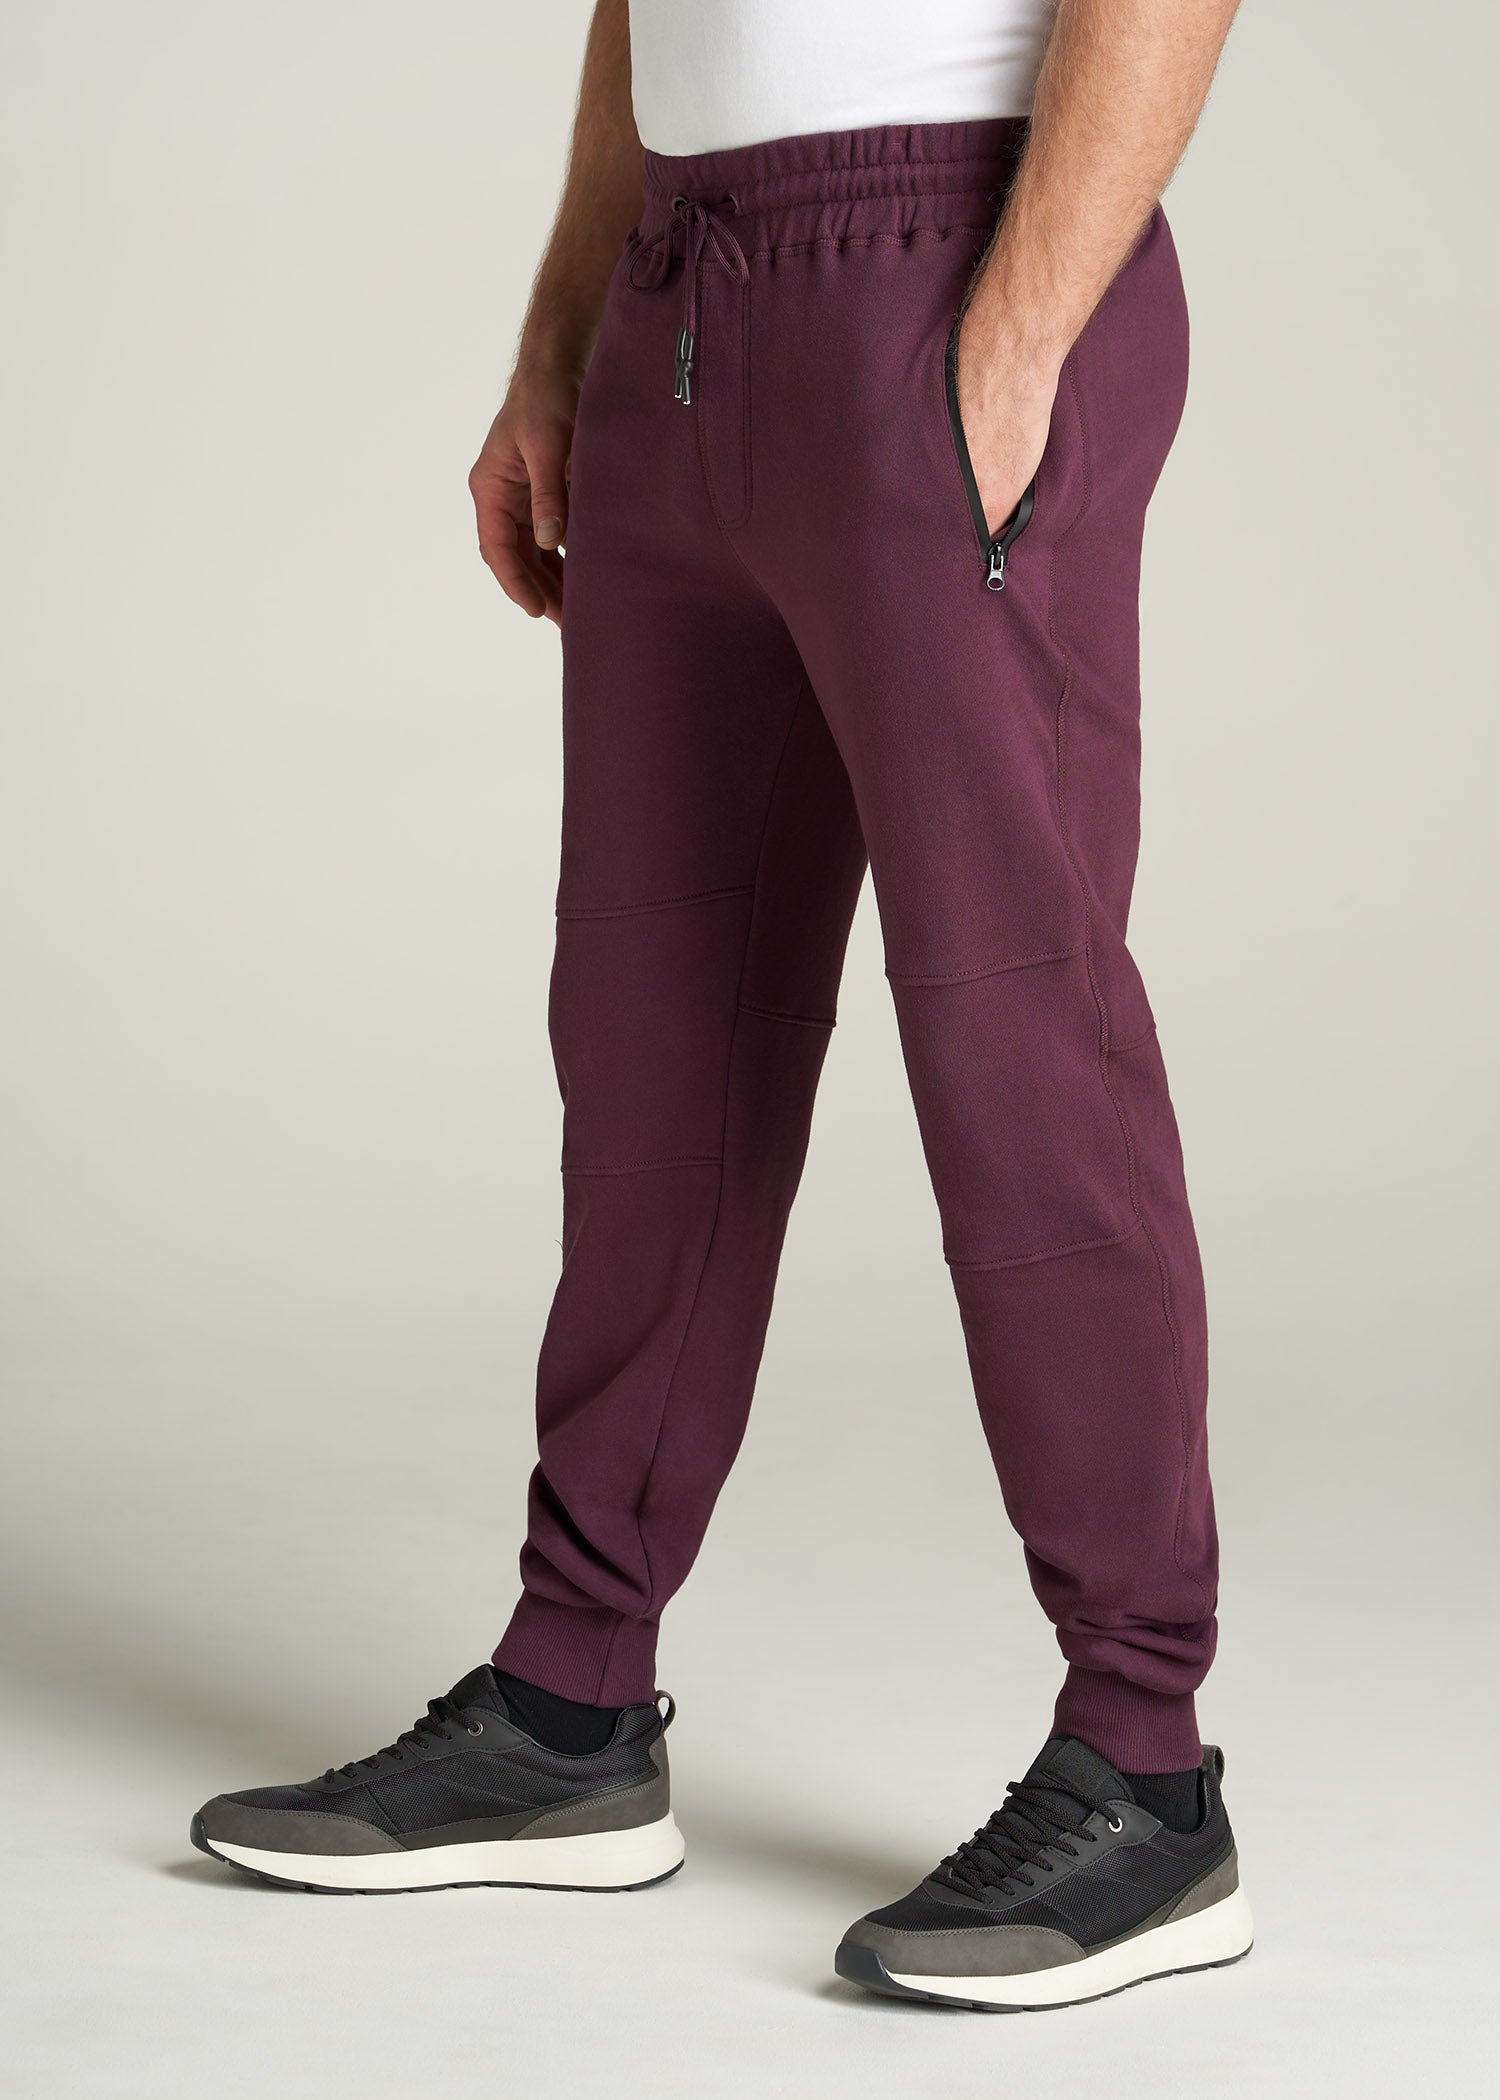 Wearever French Terry Men's Tall Joggers in Maroon